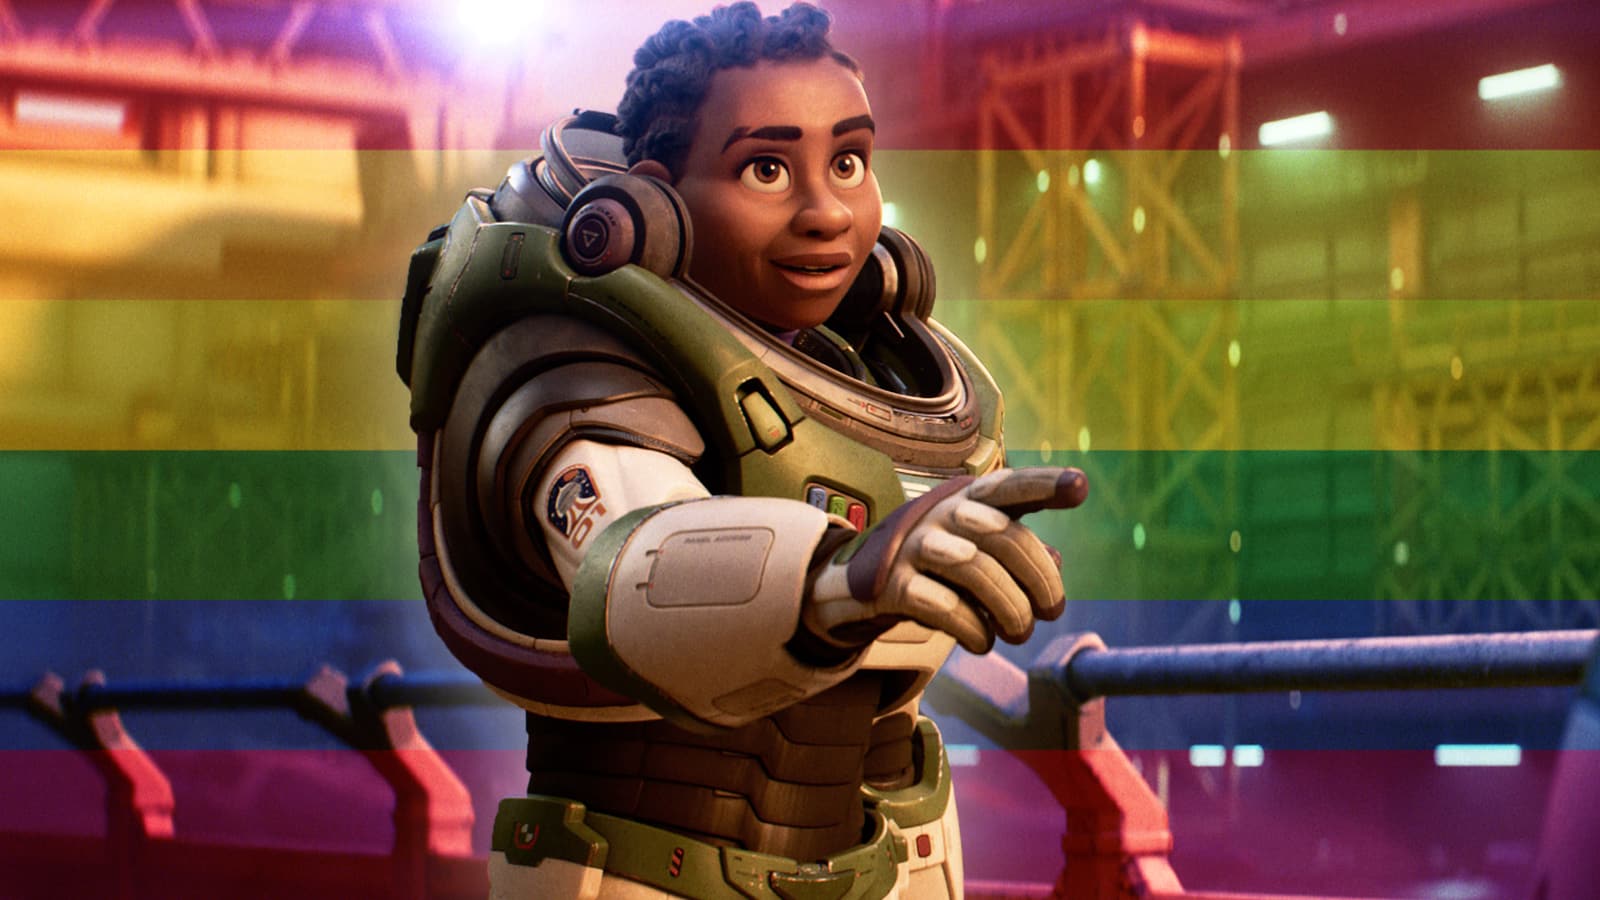 Queer character Alisha Hawthorne, who shares a gay kiss in Lightyear